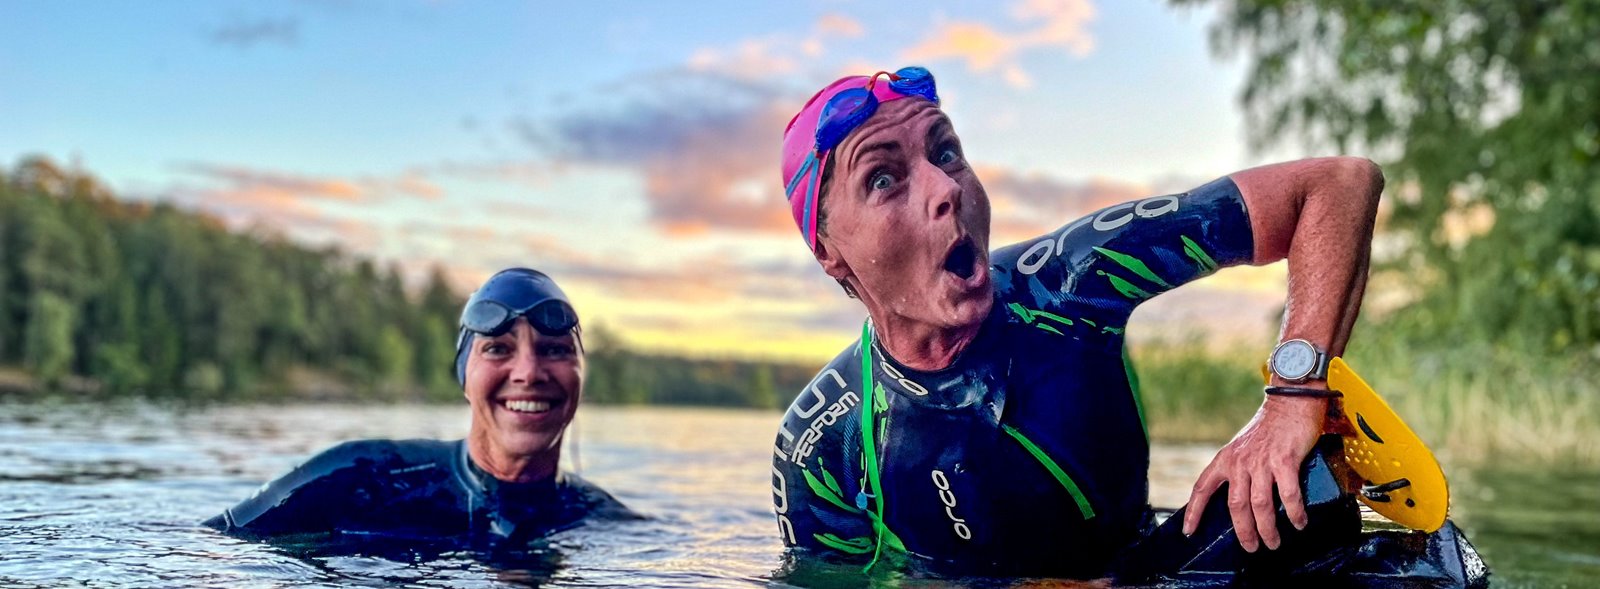 SwimRun Tips - How to Race Together